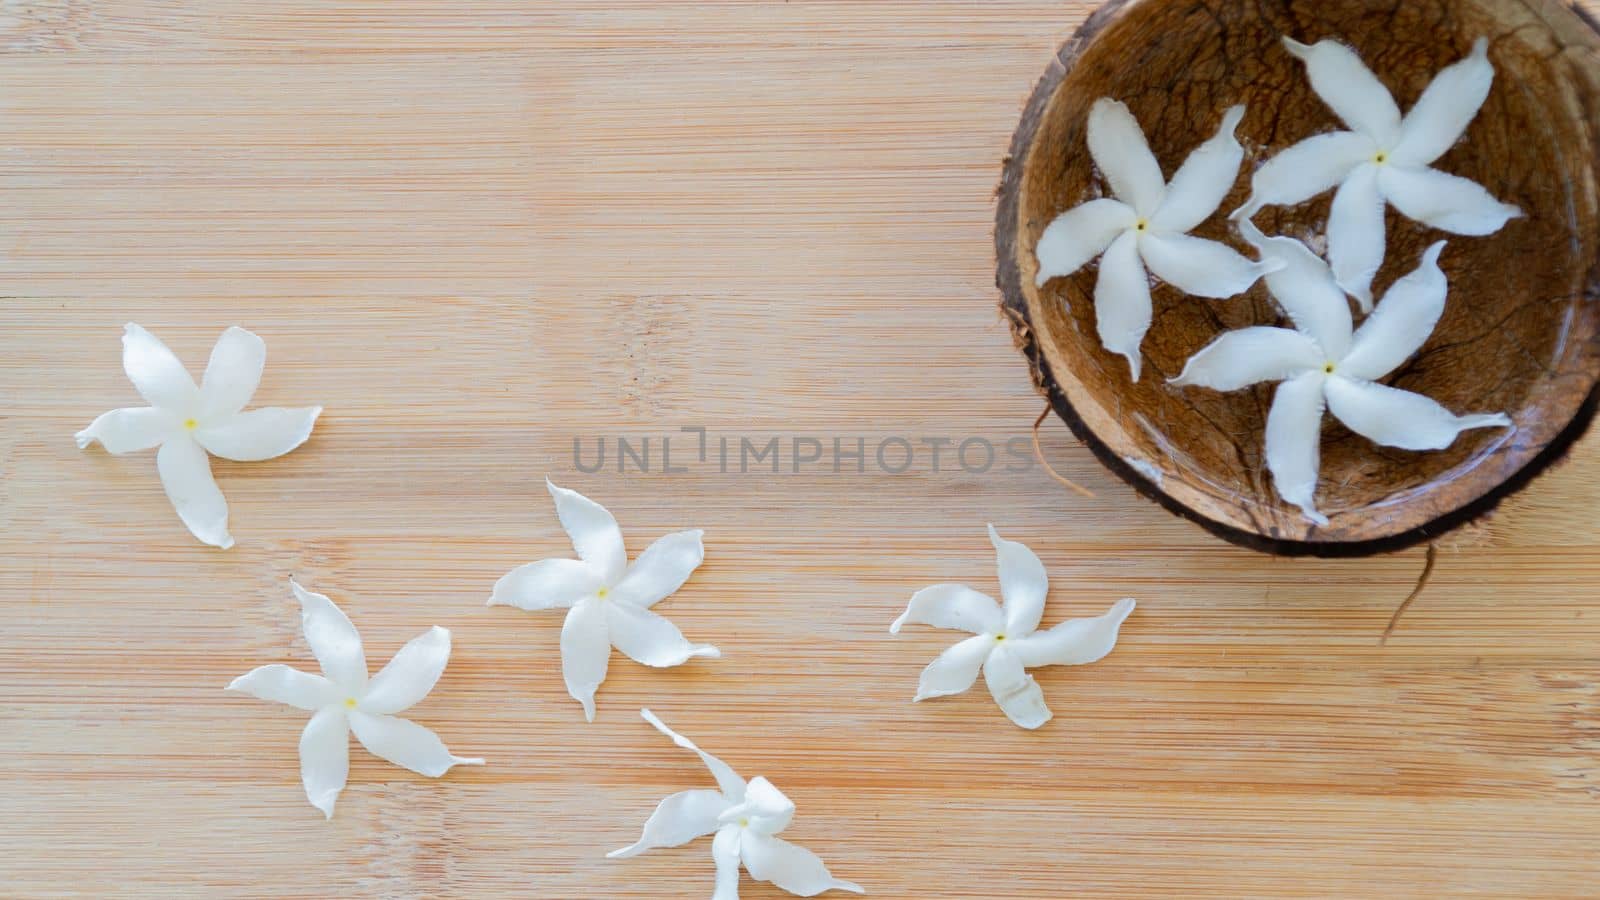 Decor of flowers, white flowers in the water in a bowl of coconut, background. High quality photo